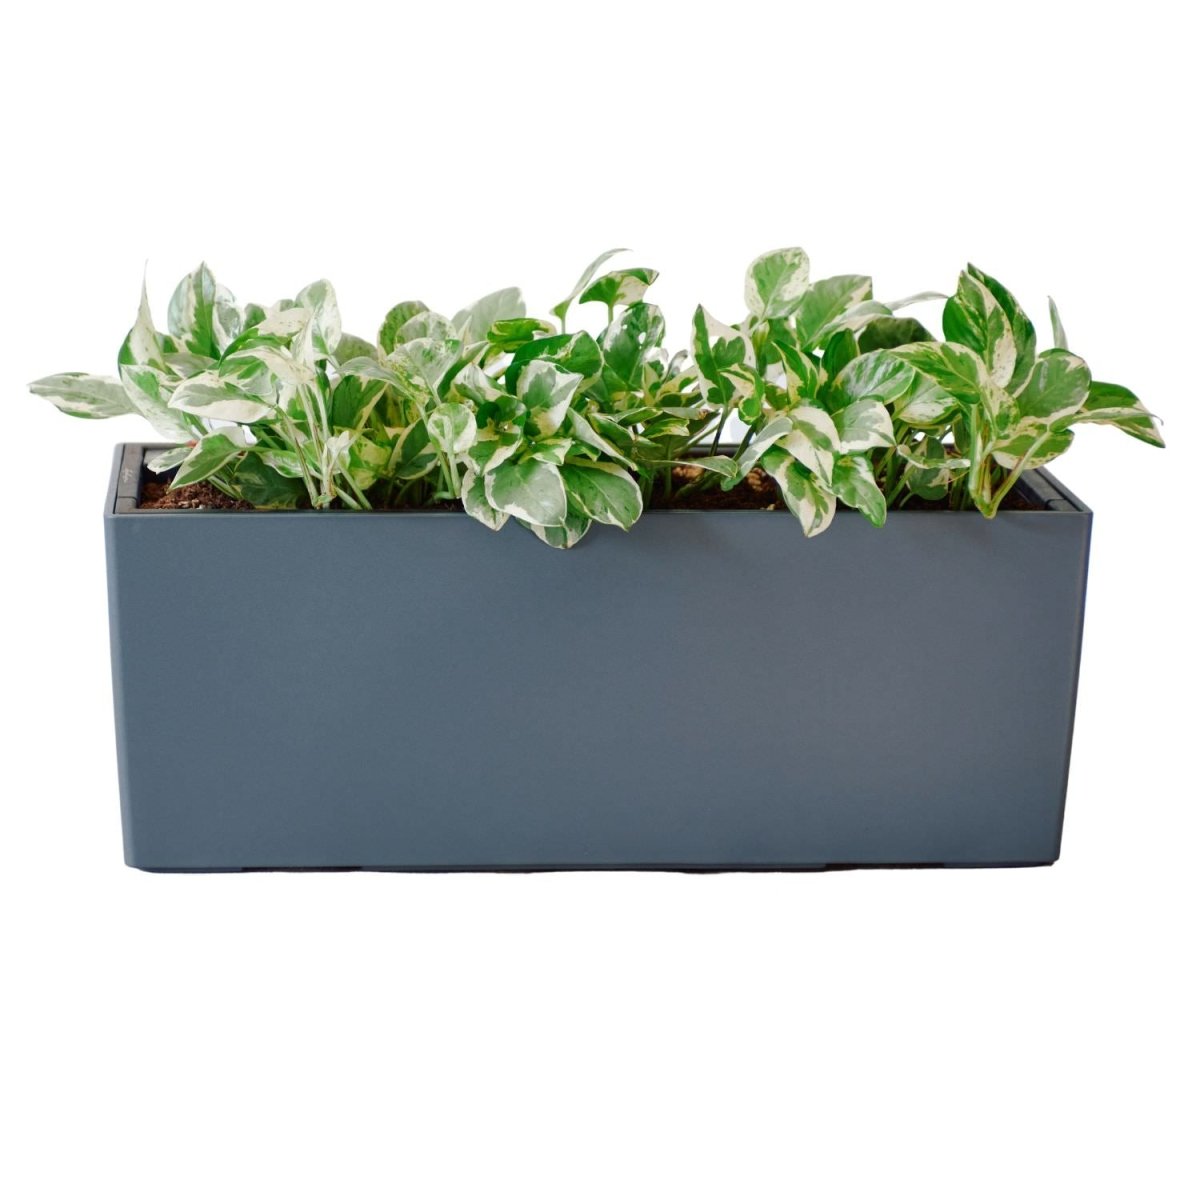 Pothos Pearls And Jade Potted In Lechuza Balconera Planter - Slate - My City Plants